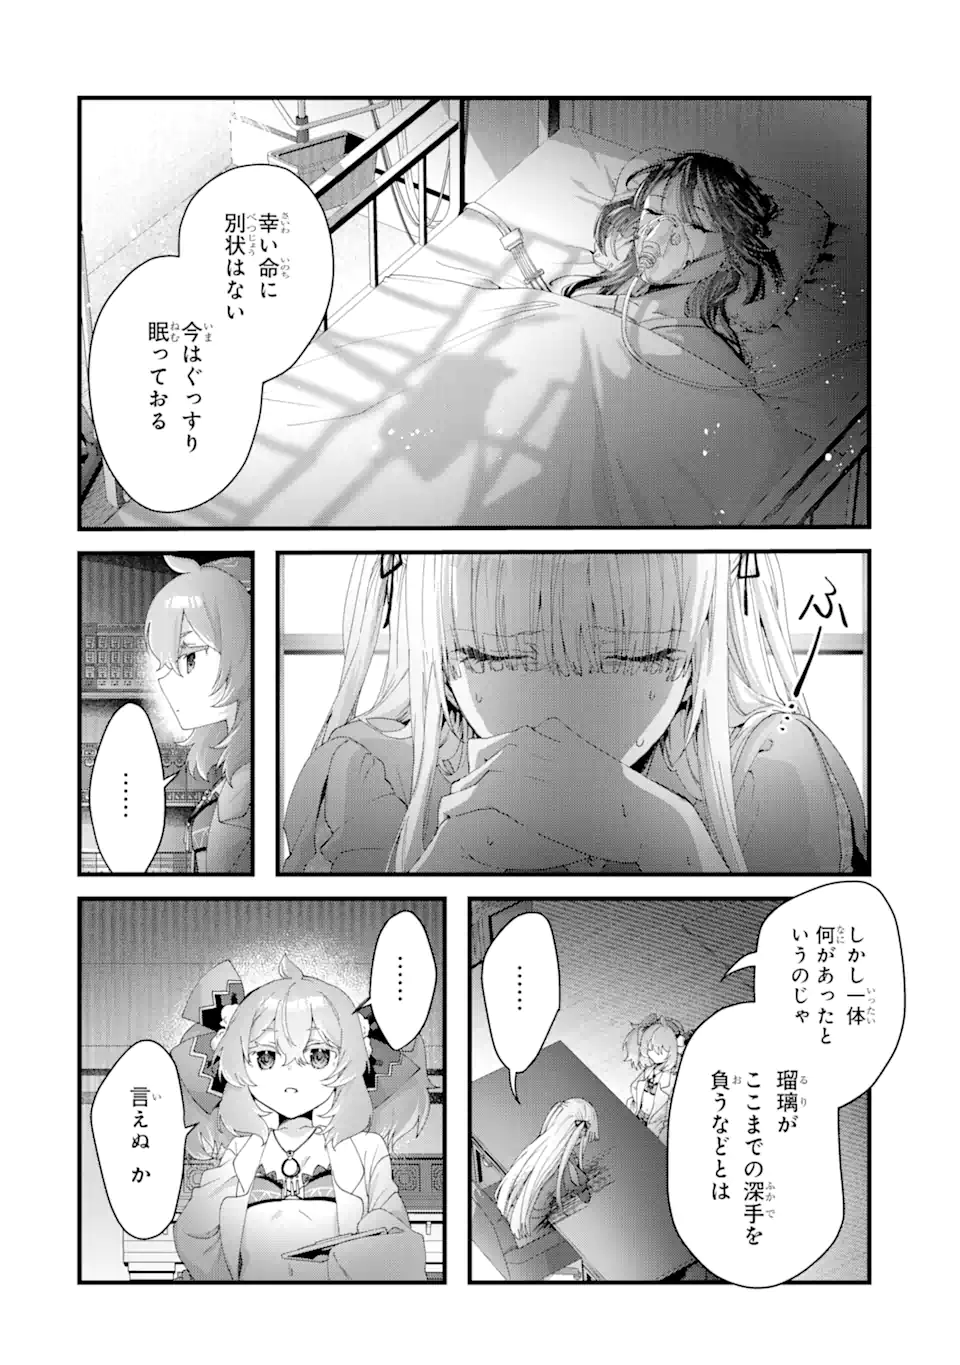 Ousama no Propose - Chapter 11.3 - Page 2